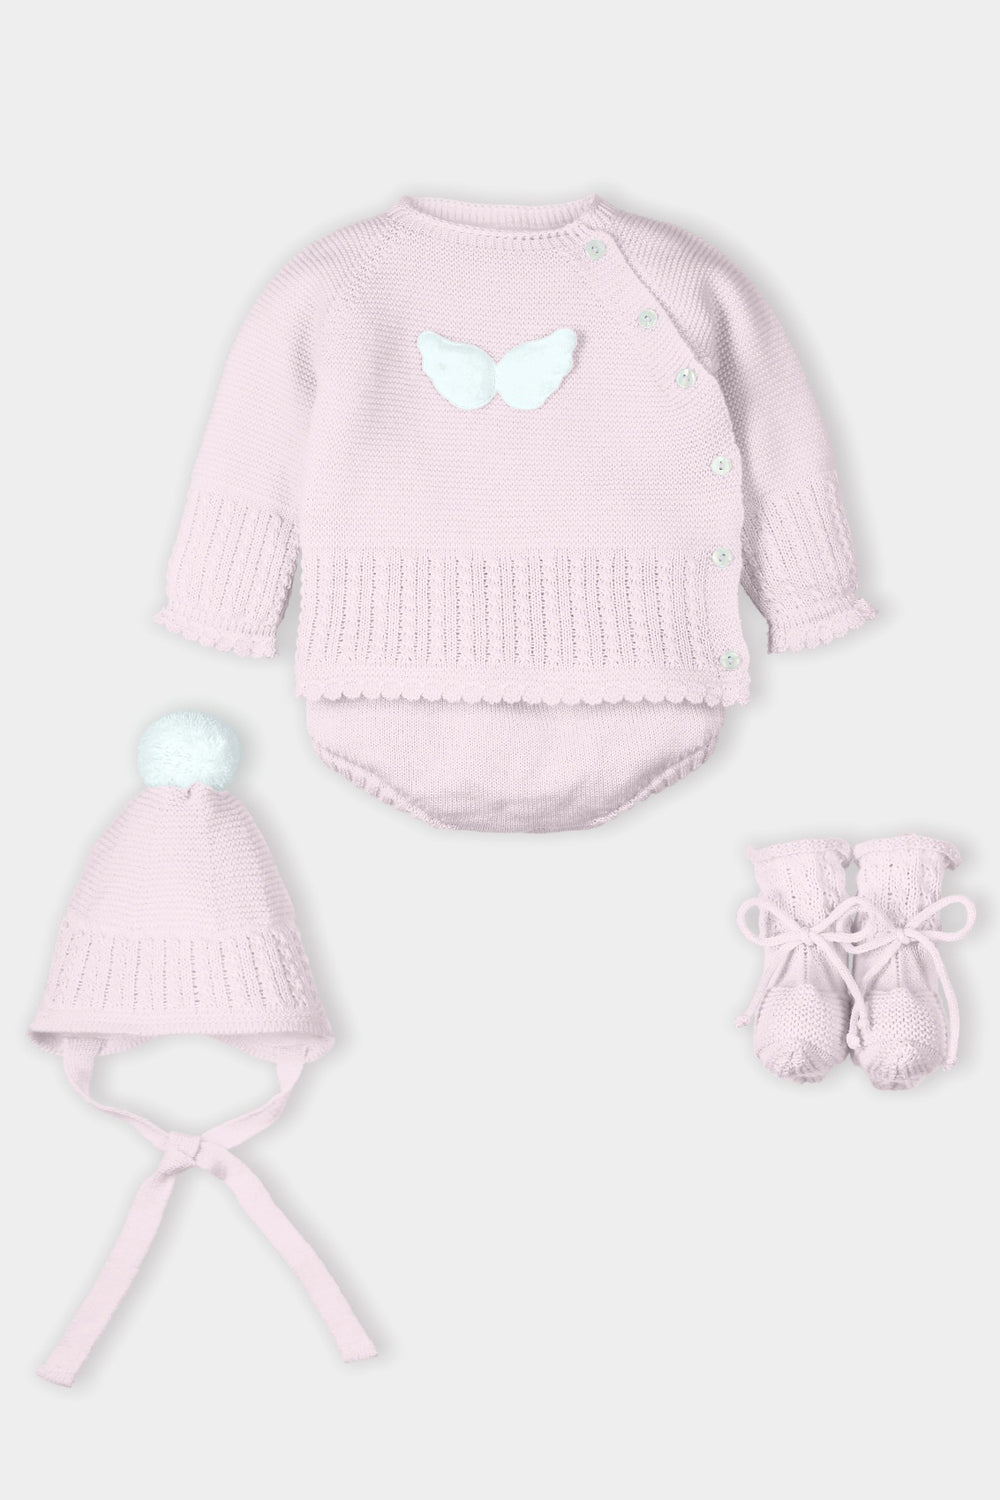 Mac Ilusión PREORDER "Dara" Knitted Angel Wings Outfit Set | Millie and John